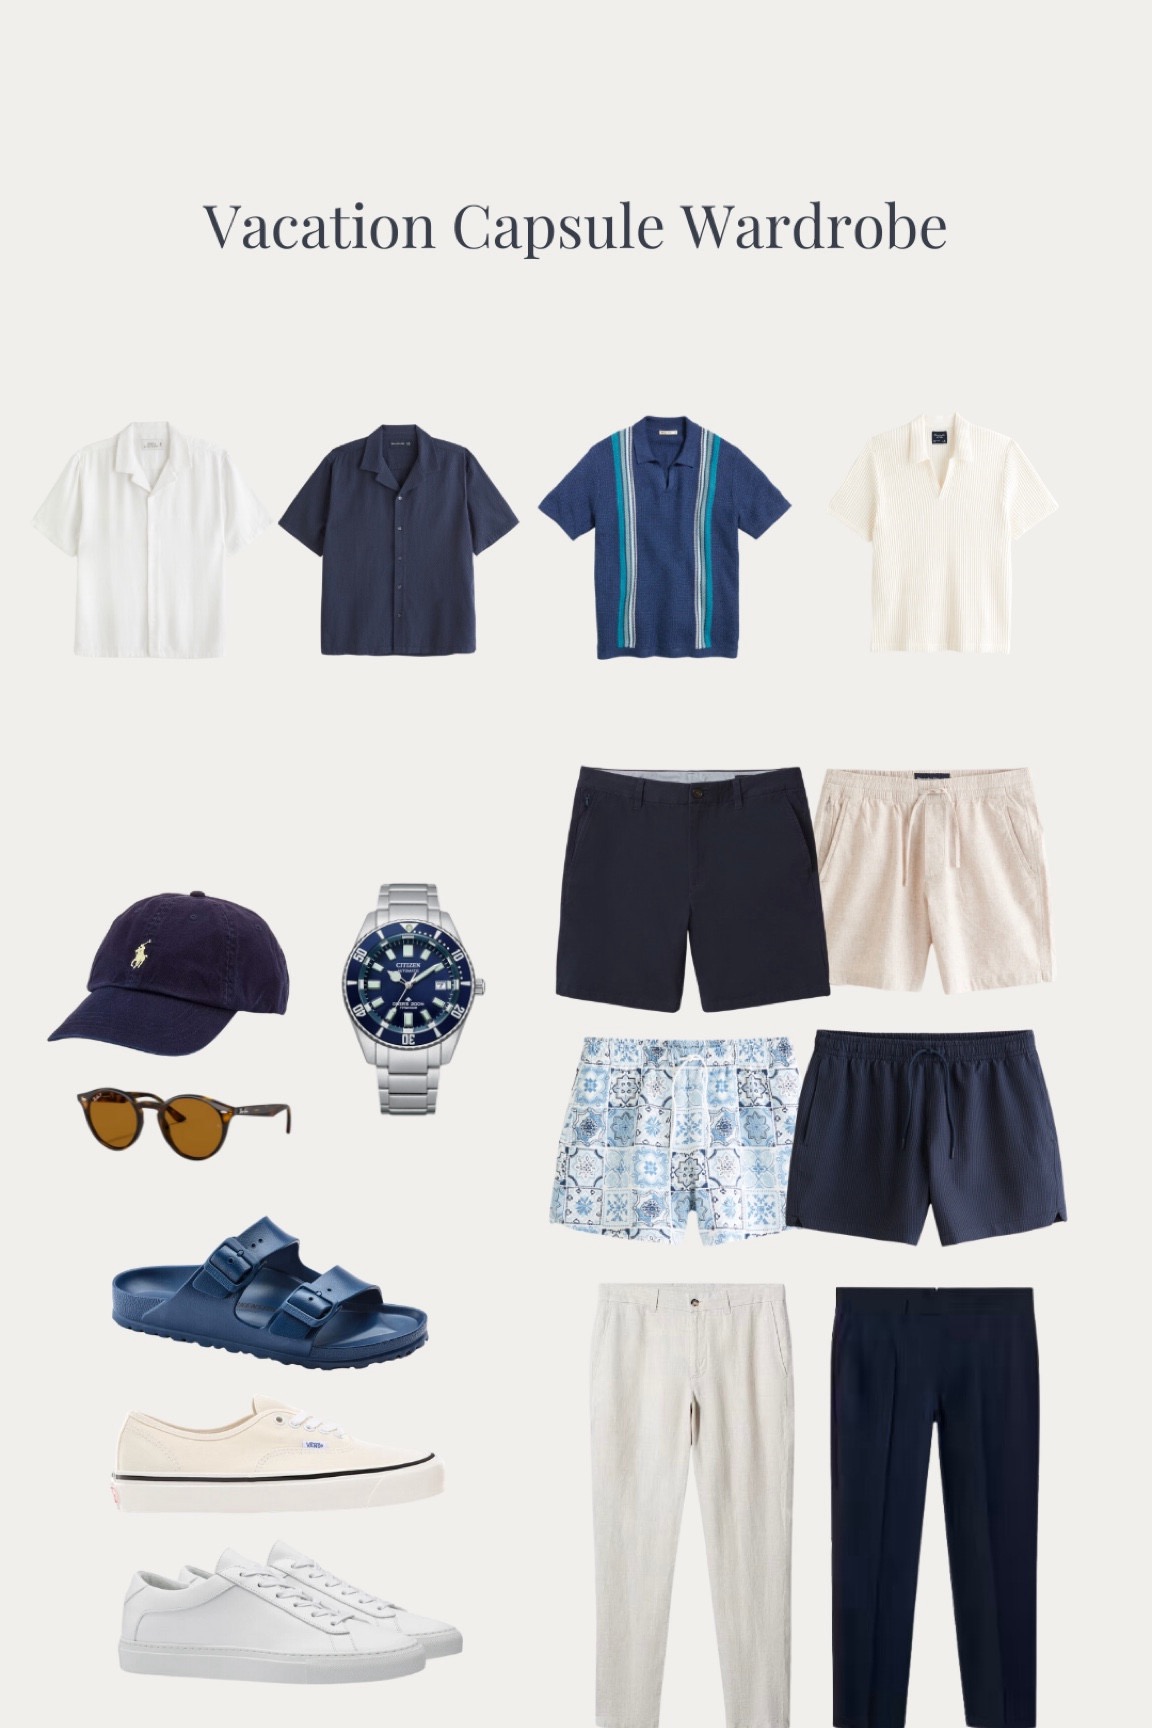 Men's Vacation Capsule Wardrobe for Warm Weather Tropical